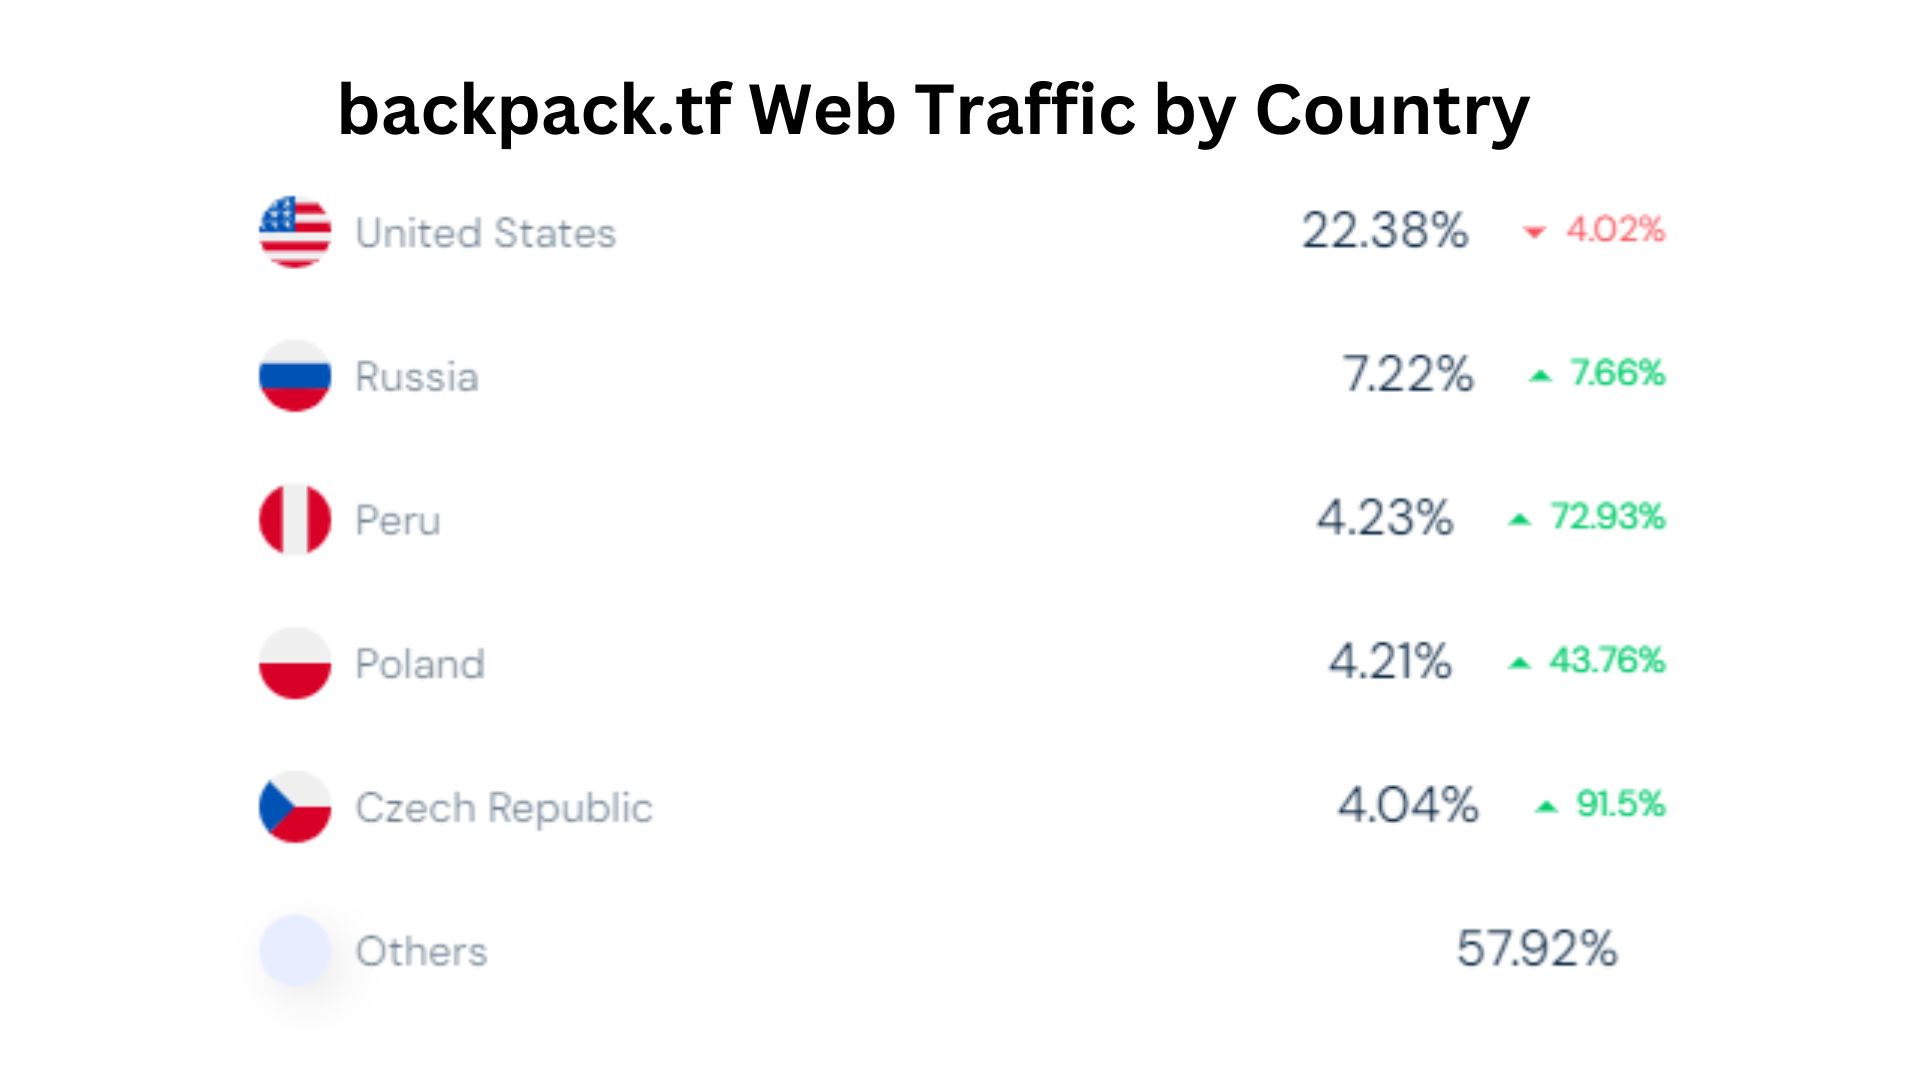 backpack.tf Web Traffic by Country